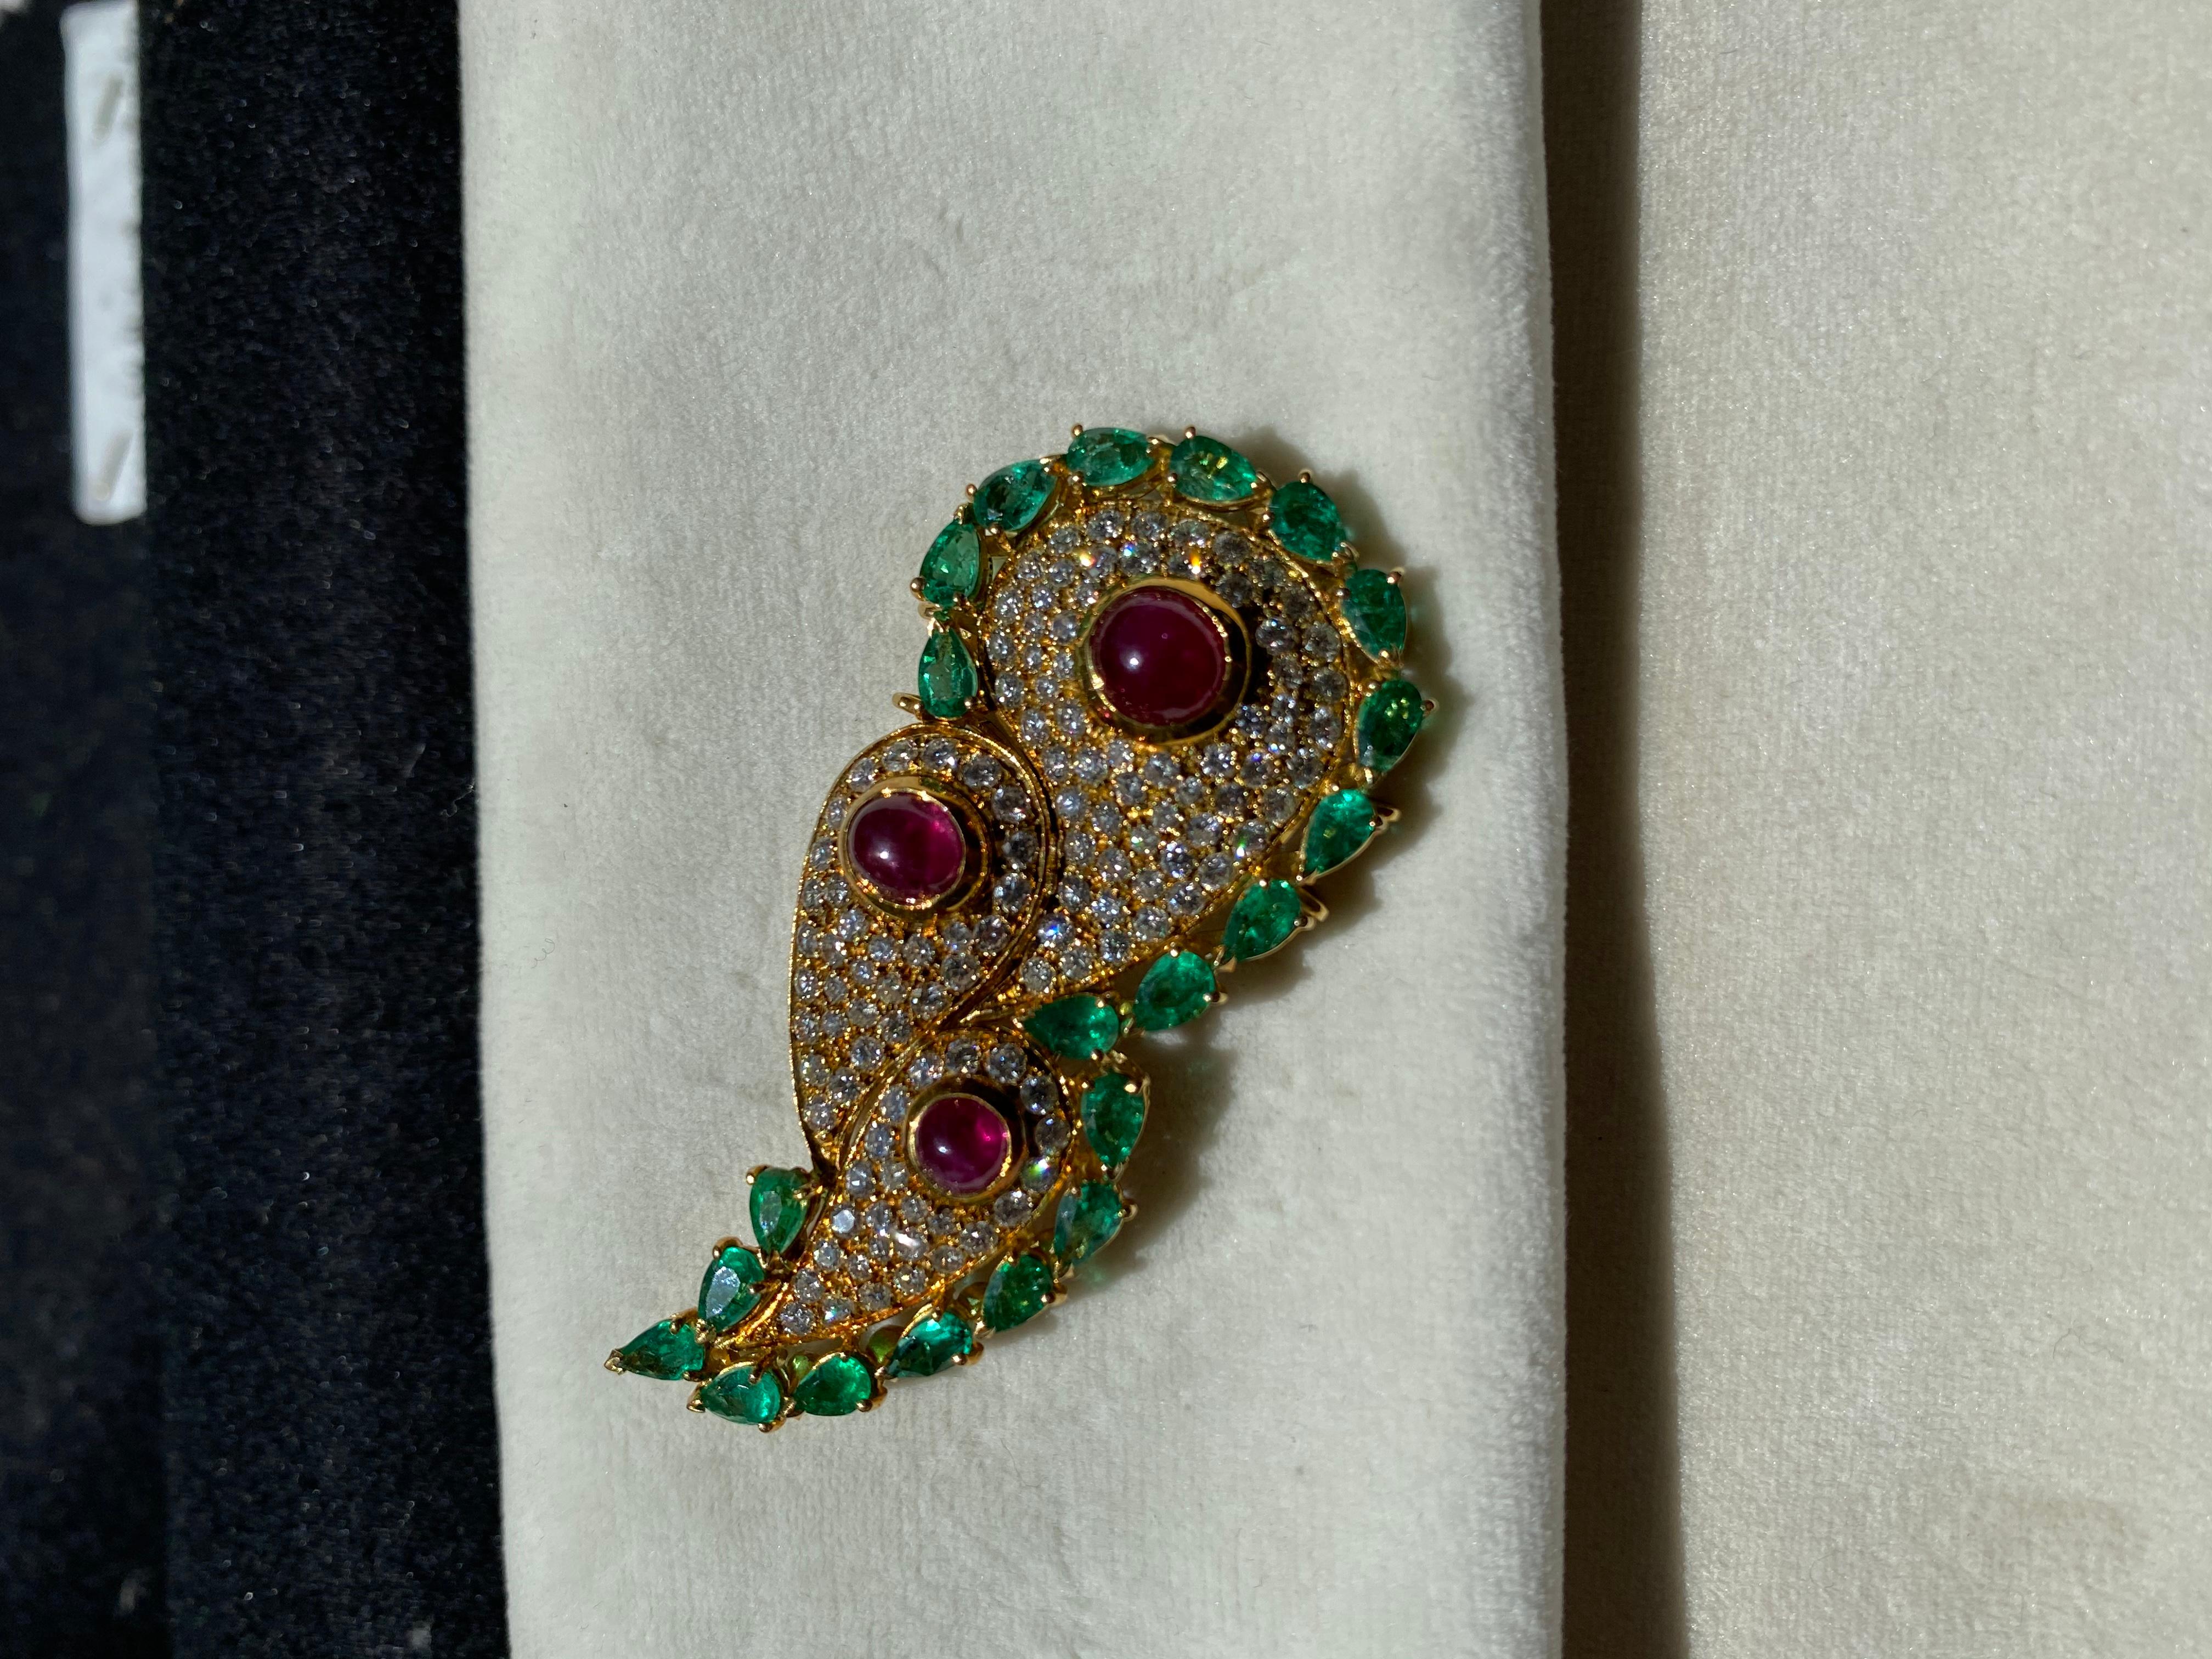 18kt gold brooch with diamonds 1,7ct 3 rubies 1,5 ct and 21 drop emeralds 2ct .
made 1980 italian manifacture.